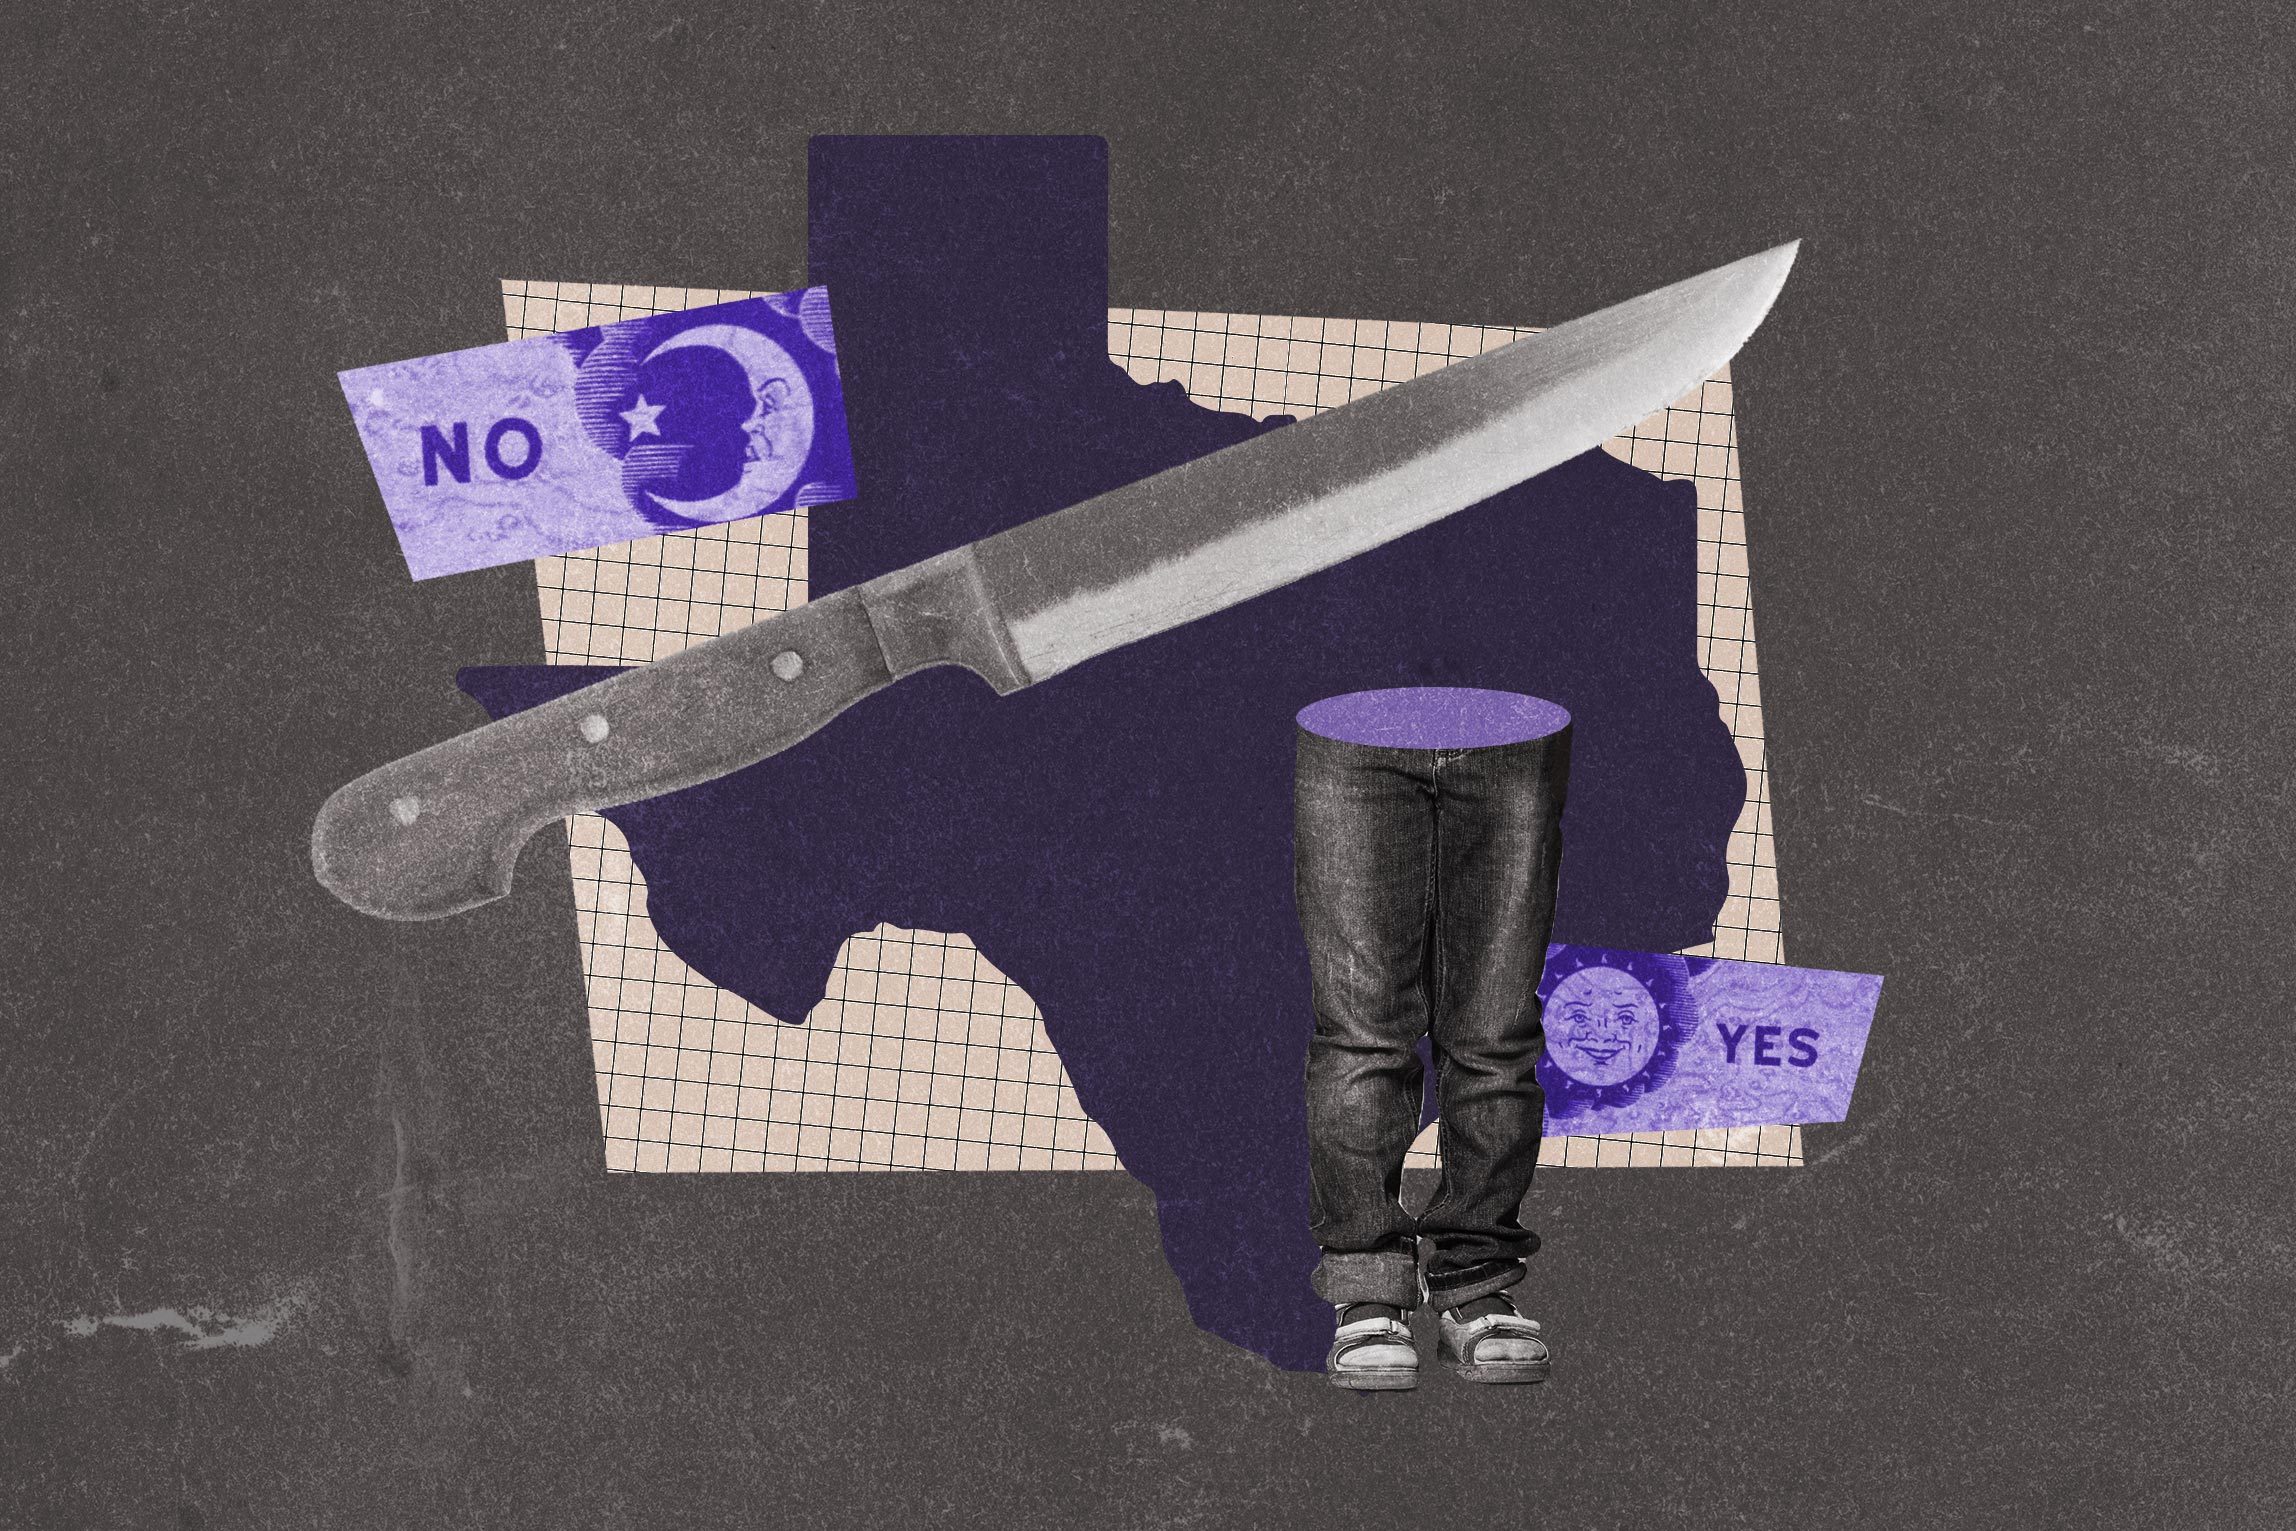 Collage of the state of Texas, knife, boy